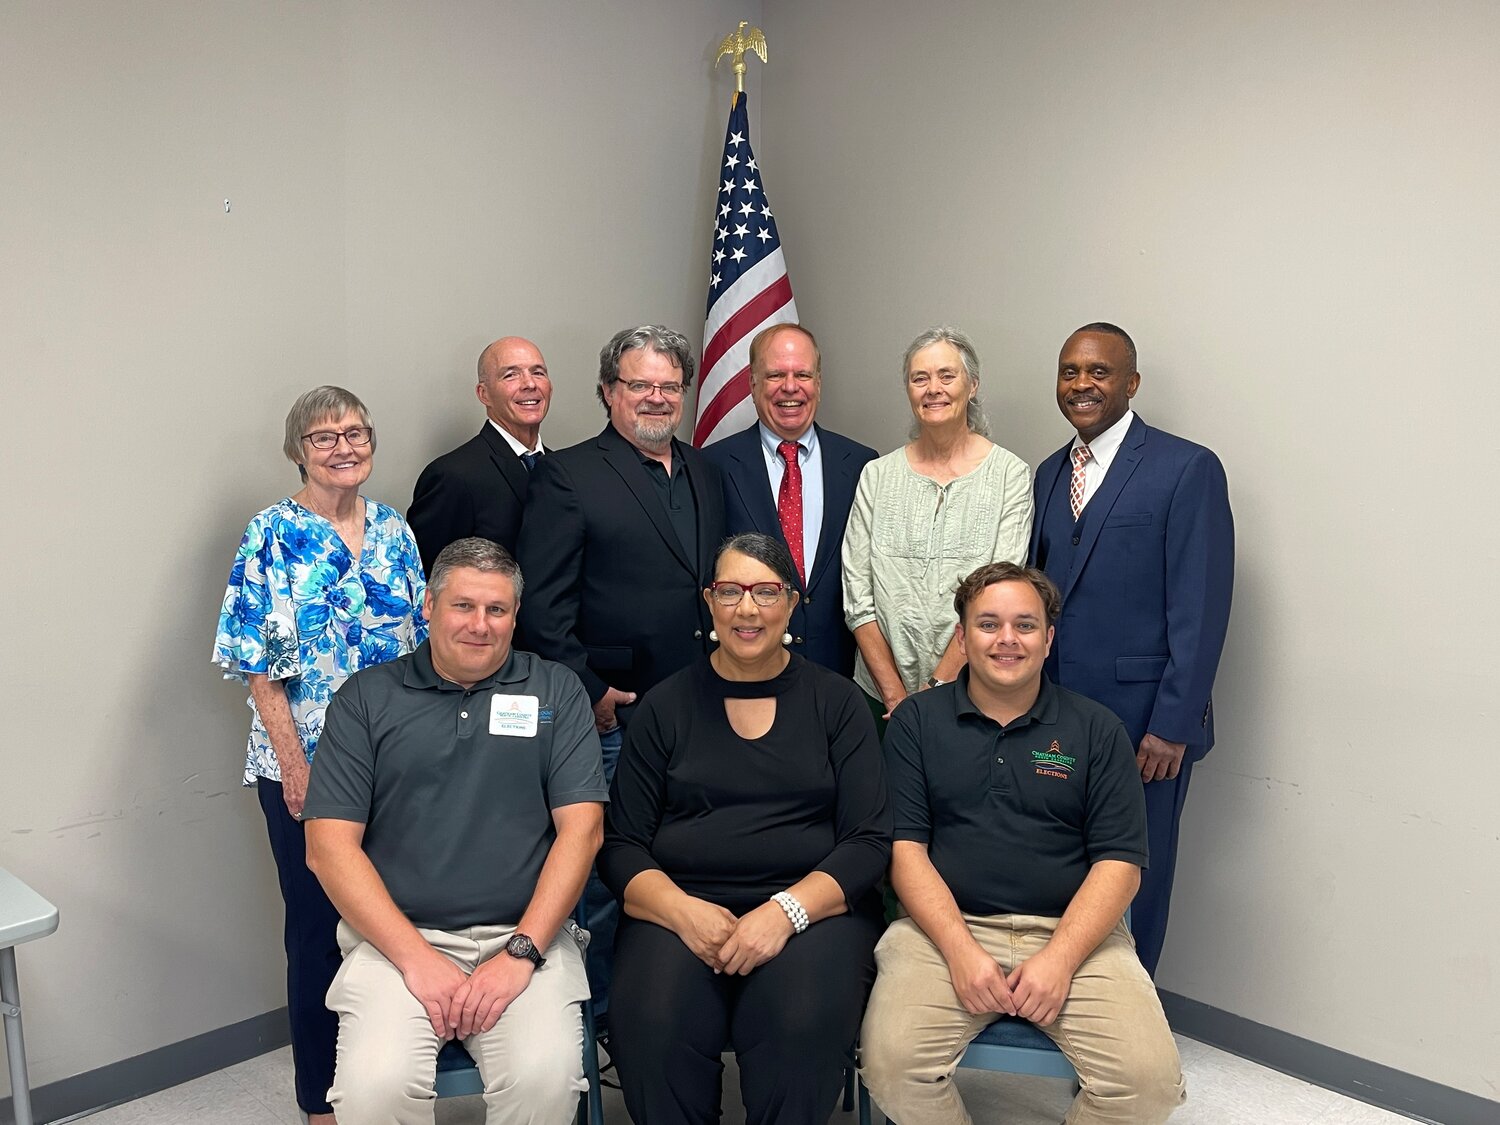 First row from left to right, Deputy Director Steve Simos, Director Pandora Paschal, and Election Specialist Chance Mashburn pose with Chatham Board of Election members (back row left to right) Erika Lindemann, Secretary Frank Dunphy, Mark Barroso, Bob Tyson, Chair Laura Heise, and N.C. House Rep. Robert Reives II (D-Dist.54).